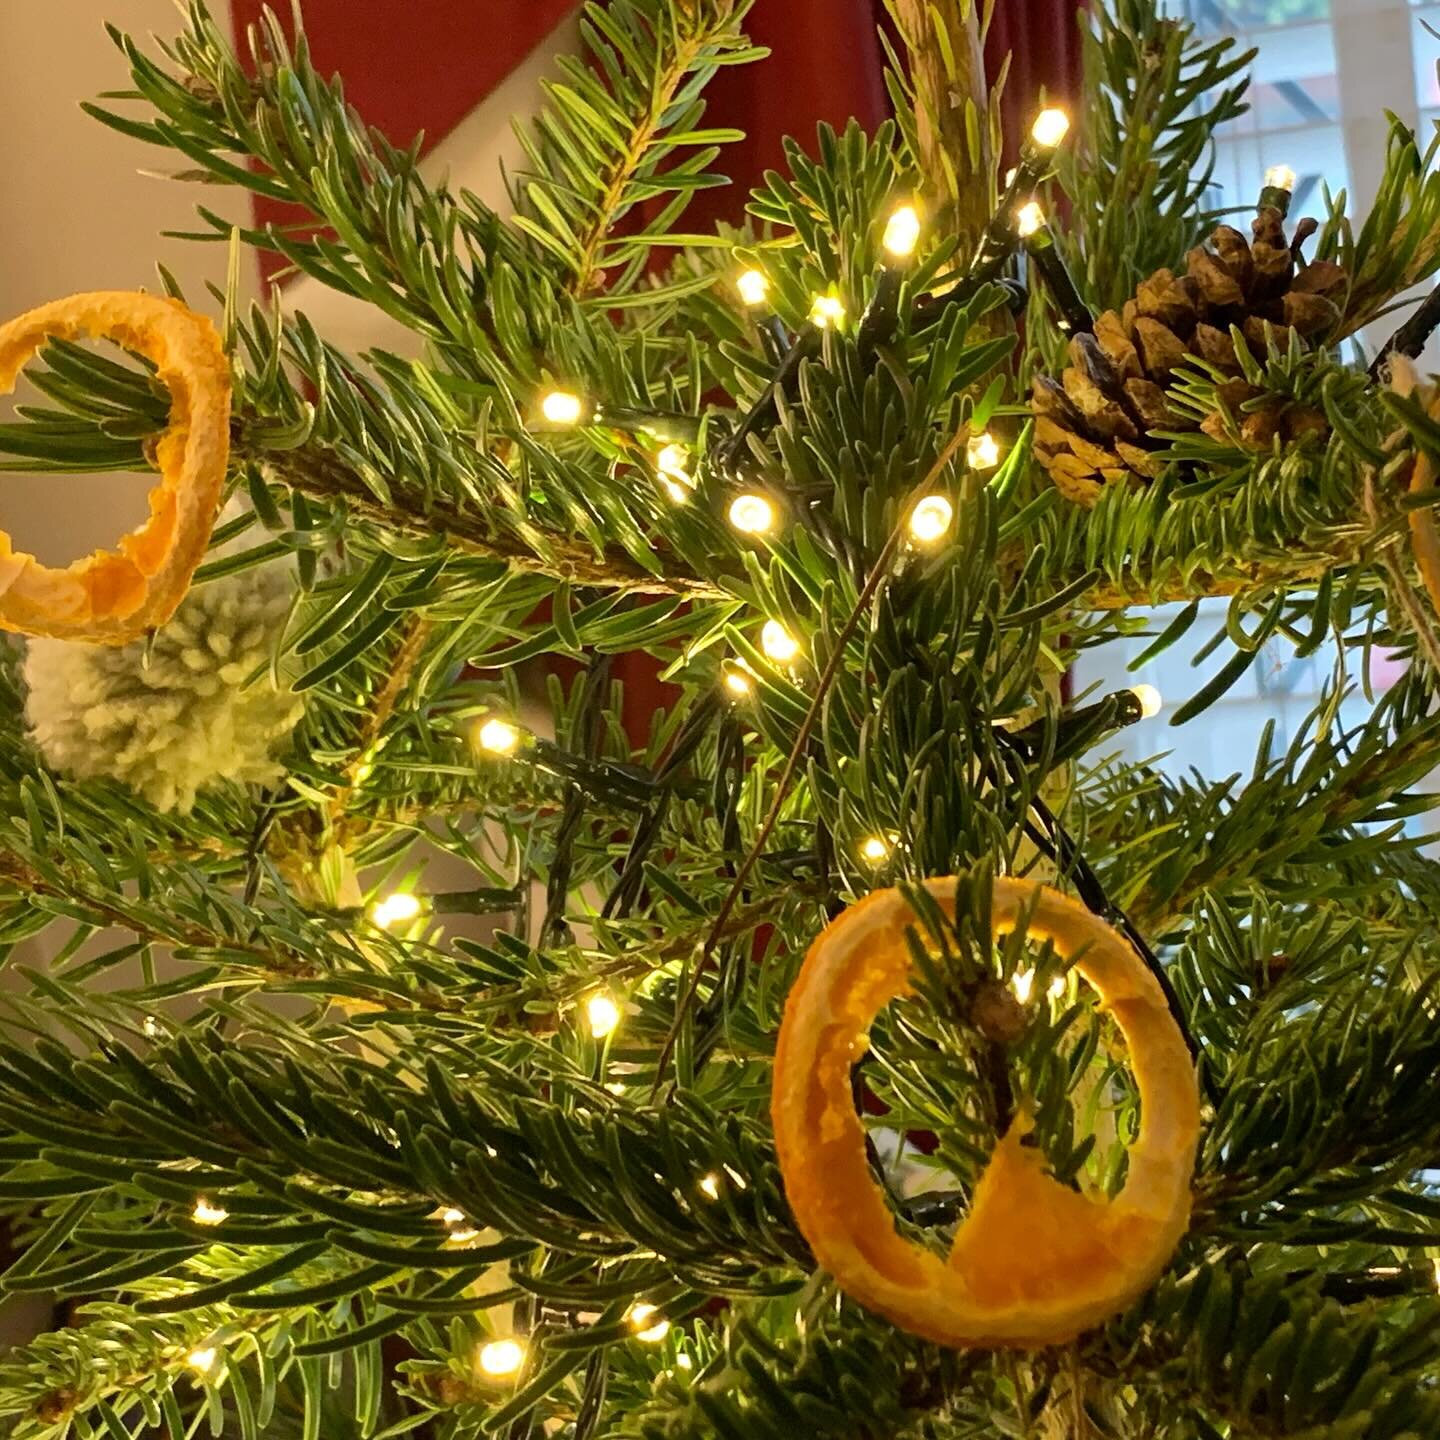 Why, hello, first day of the last month of the year! 

#whoa
#mindblown
#timeflies
#timetravel
#legalyear
#michaelmas
#christmas2023
#london 🇬🇧 
#lawyer
#solicitor
#ukimmigration 
#lawyermum
#lawyermom 
#christmaspommander 
#orange
#cloves 

☝️ Fir